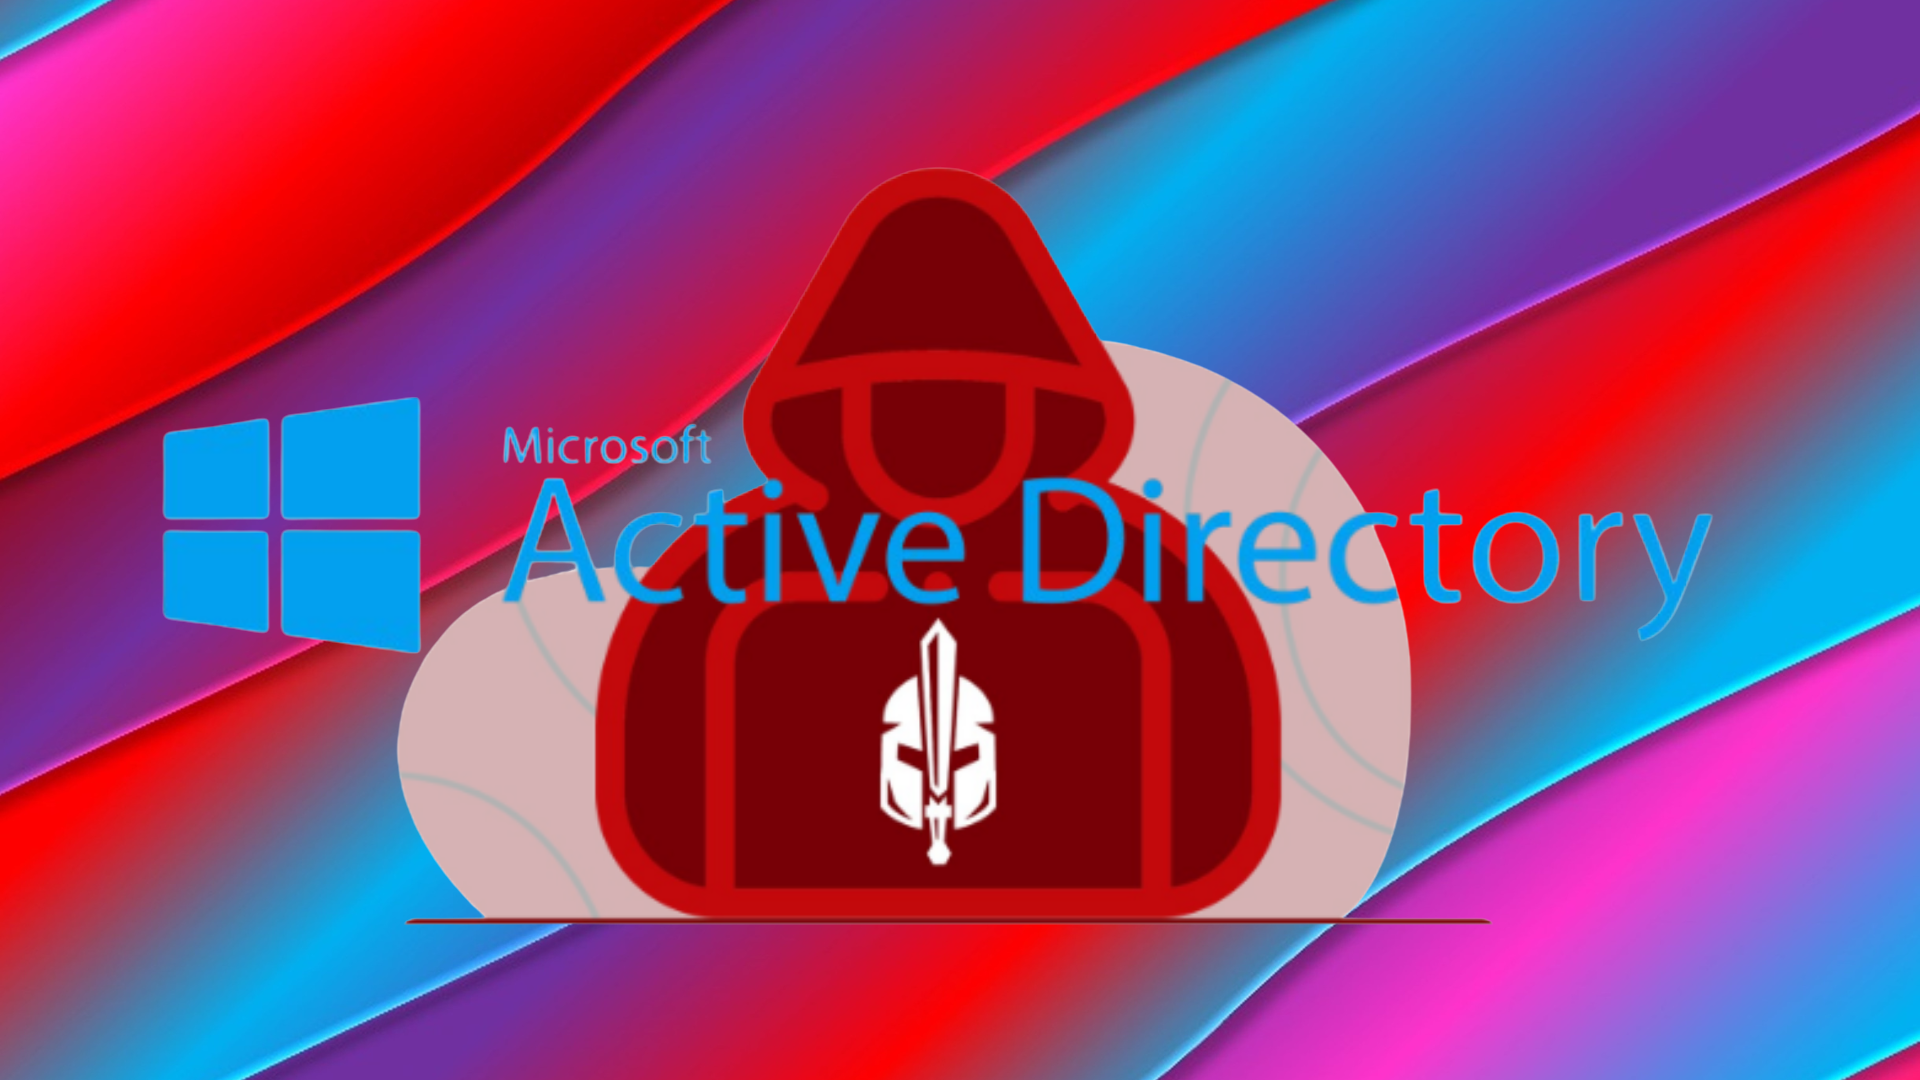 Attacking active directory with linux